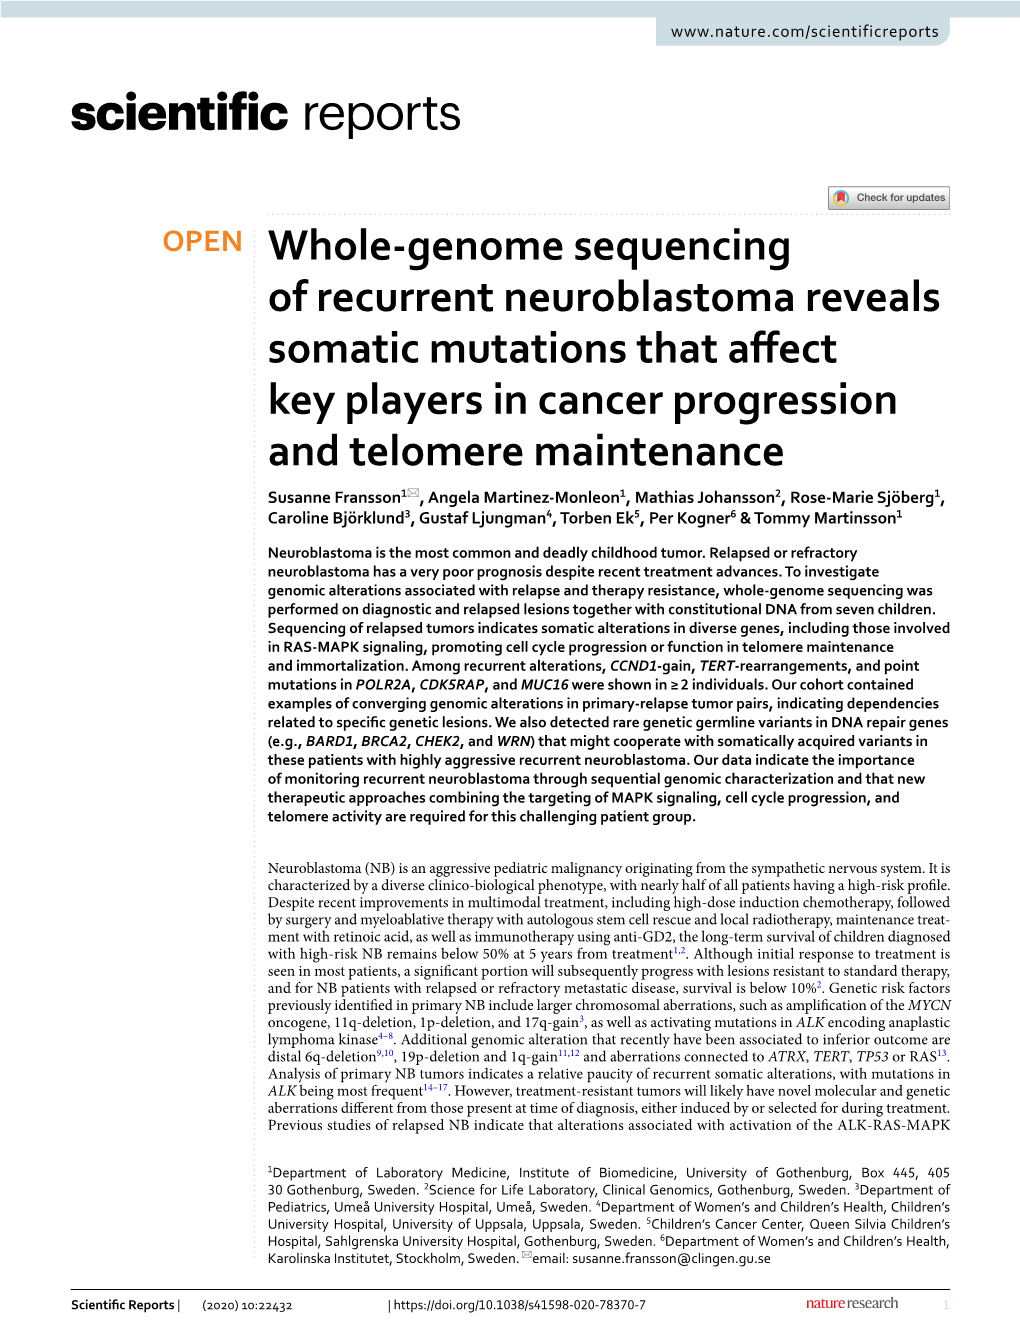 Whole-Genome Sequencing of Recurrent Neuroblastoma Reveals Somatic Mutations That Affect Key Players in Cancer Progression and T